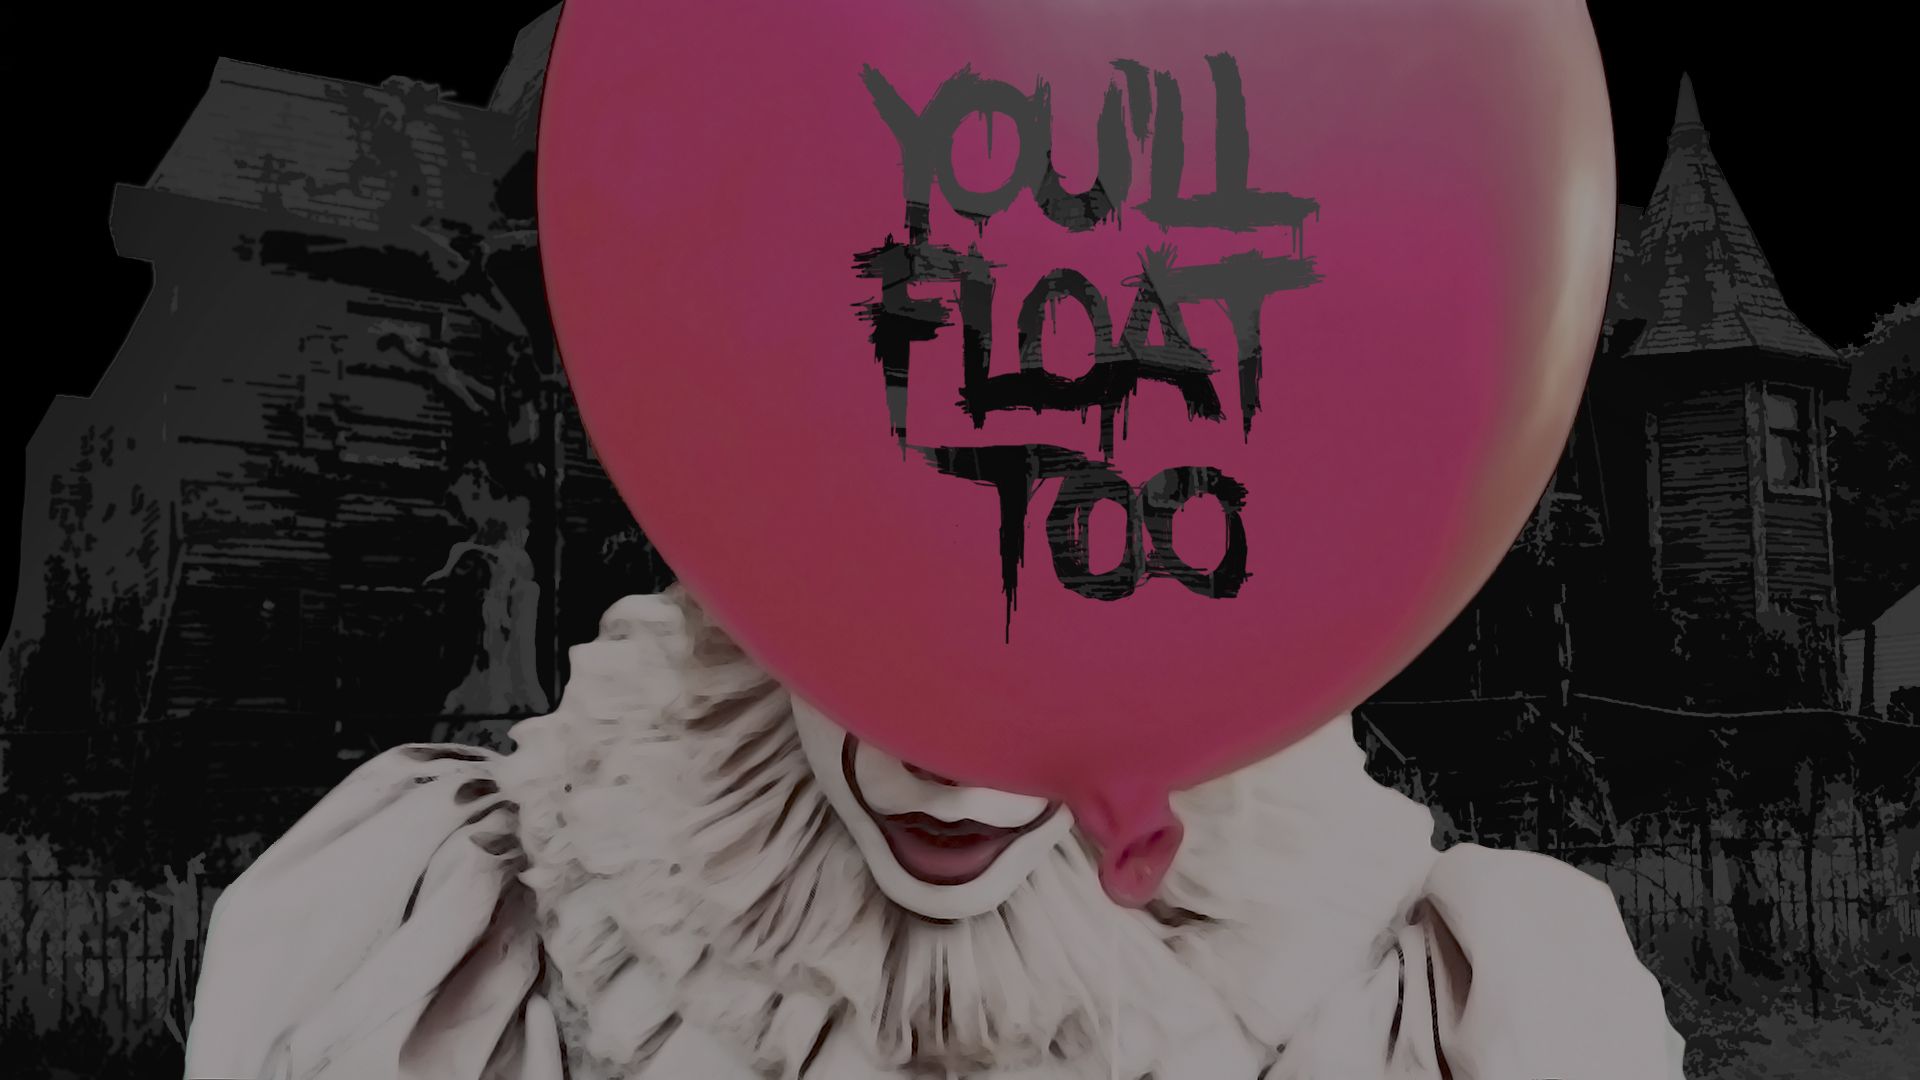 clowns, Pennywise, It movie, You will float too Wallpaper HD / Desktop and Mobile Background